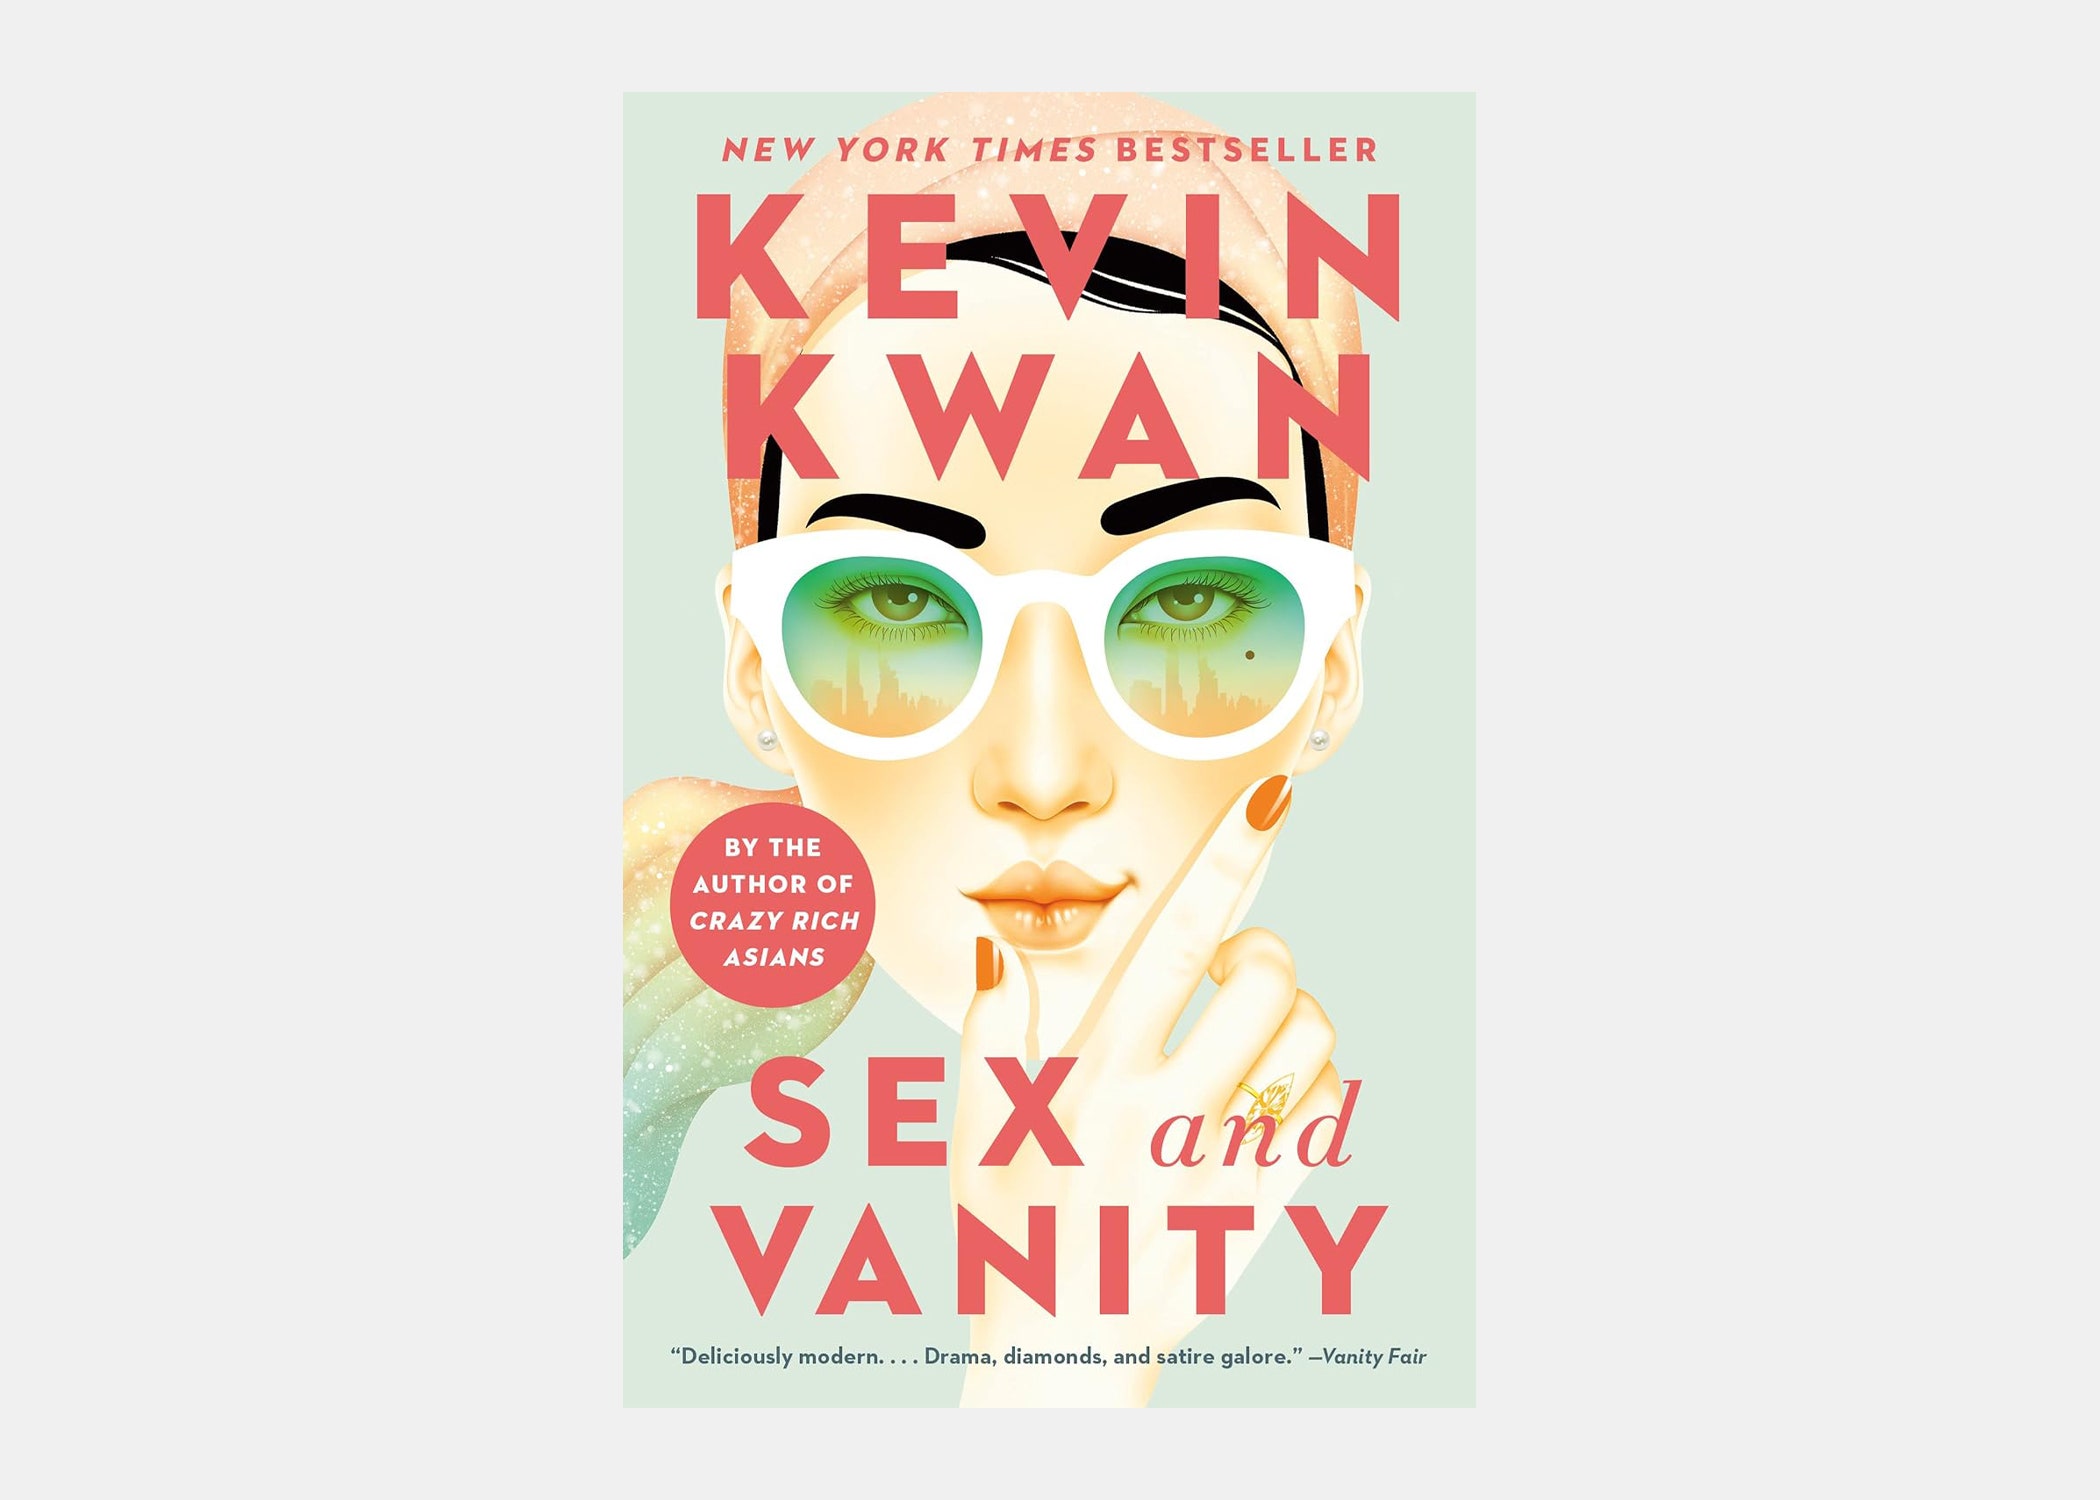 <p><strong>What it’s about:</strong> For a contemporary take on the set-up introduced by <em>A Room with a View</em>, pick up Kevin Kwan’s delightfully frothy <em>Sex and Vanity</em>. The protagonists are named Lucie and Charlotte as well, and Kwan’s latest novel Forster-ly satirizes the uber-rich Asian and Asian American diaspora that the author has long lampooned in his <em>Crazy Rich</em> trilogy of books. Only time will tell though, if sex and vanity are as timeless as a room with a view—but as far as cotton-candy vacation reads go, you can do far worse than bringing this paperback onto a chartered yacht.</p> <p><strong>The mood it’s giving:</strong> <em>Crazy Rich Asians</em> decadence goes to Capri (and the Hamptons)</p> <p><strong>The book’s first line:</strong> “[an email with the subject line: la dolce vita] Lucie!!! I’m <em>sooooo</em> happy you’re coming to my wedding in Capri!”</p> $10, Amazon. <a href="https://www.amazon.com/Sex-Vanity-Novel-Kevin-Kwan/dp/0593081935/ref=tmm_pap_swatch_0">Get it now!</a><p>Sign up to receive the latest news, expert tips, and inspiration on all things travel</p><a href="https://www.cntraveler.com/newsletter/the-daily?sourceCode=msnsend">Inspire Me</a>